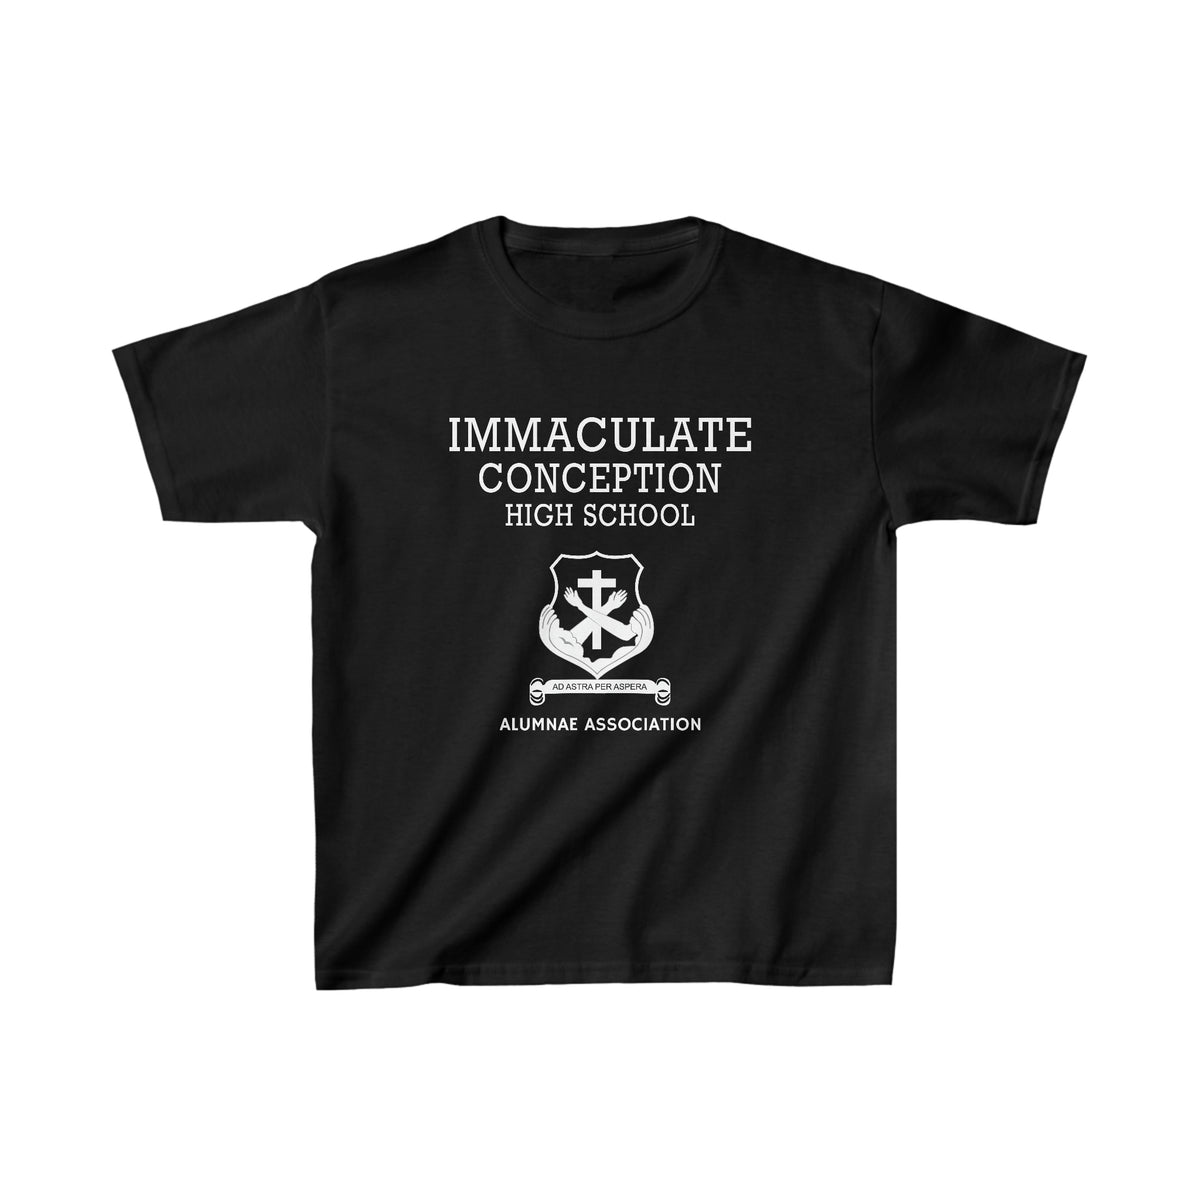 Immaculate Conception High School Alumnae Association Heavyweight Youth Tee